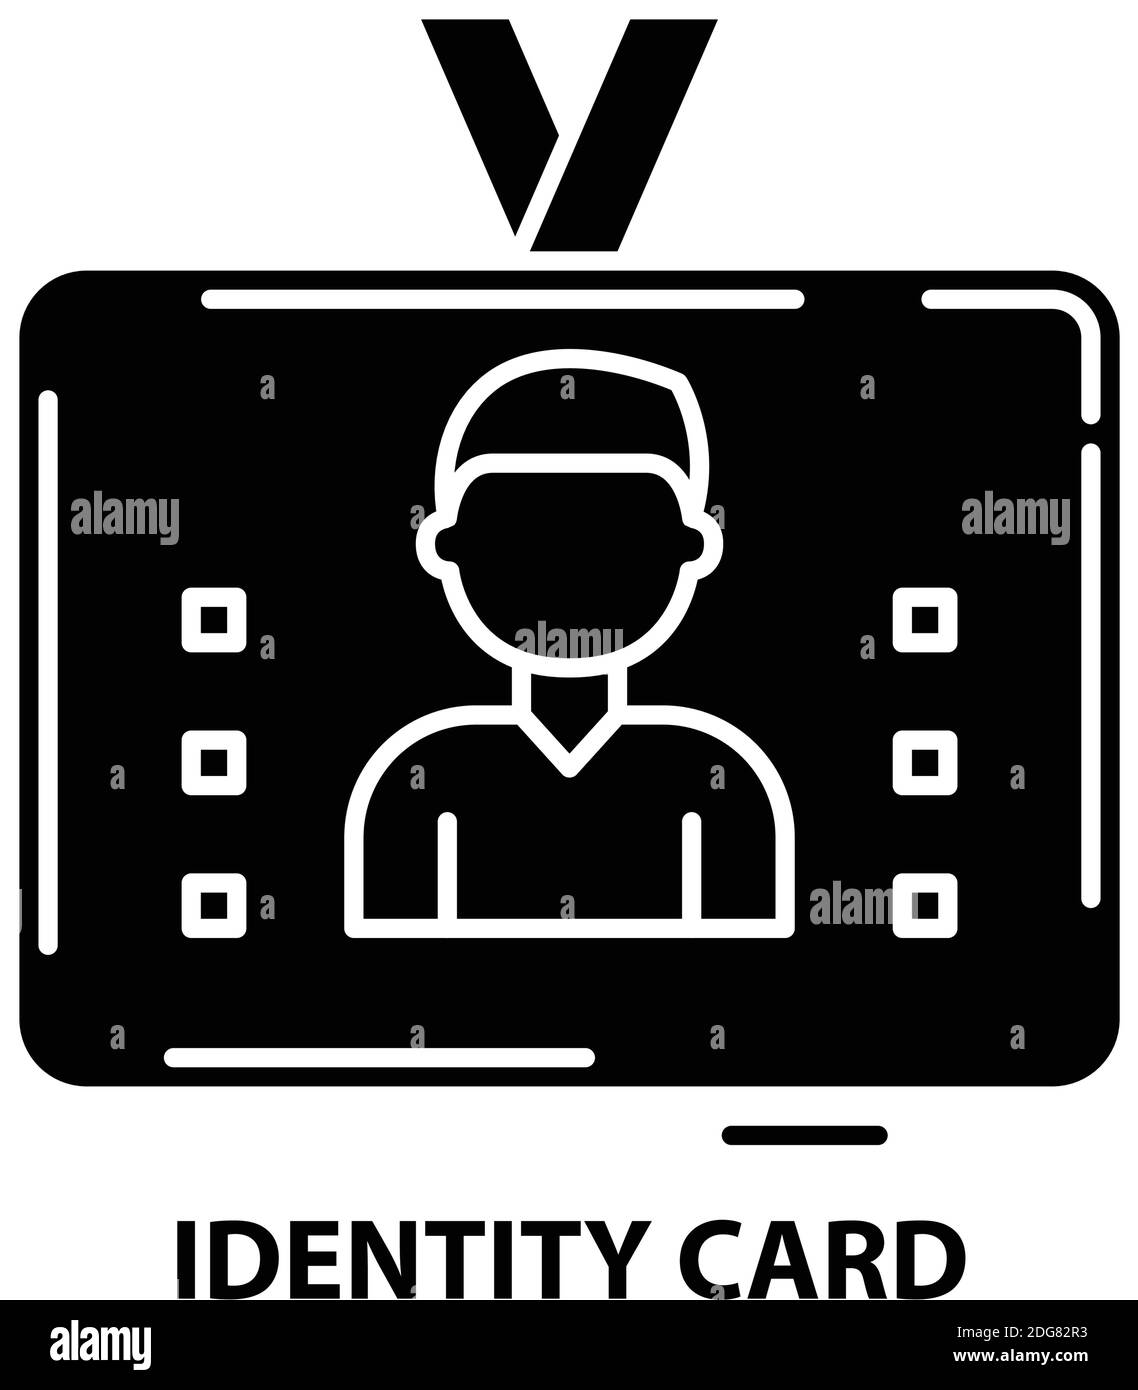 identity card icon, black vector sign with editable strokes, concept illustration Stock Vector